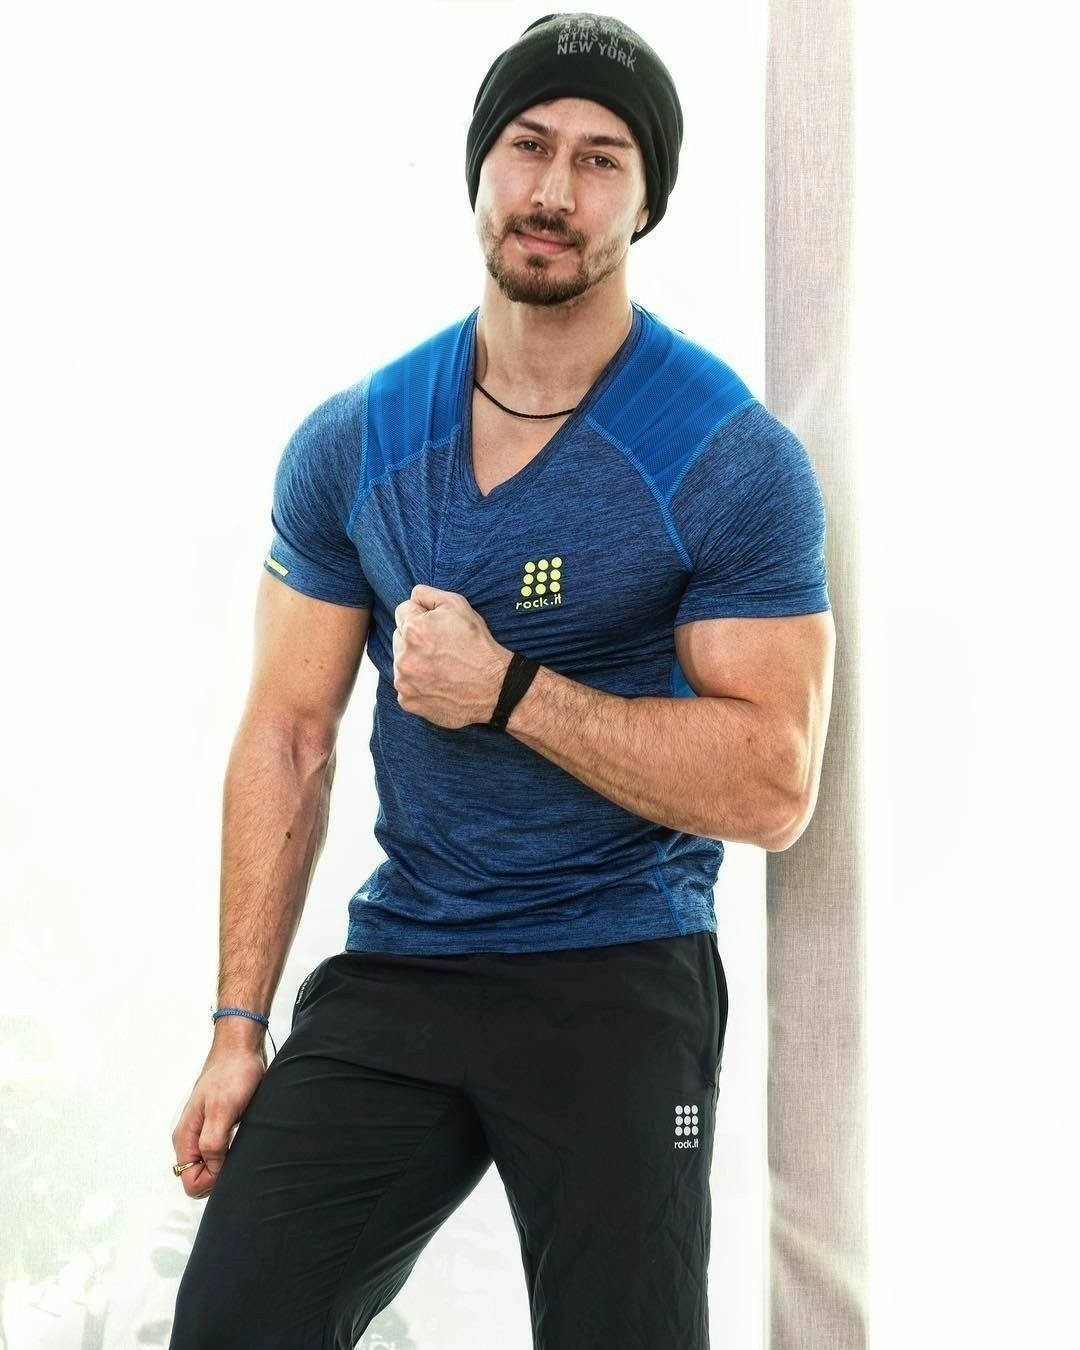 Tiger Shroff Flaunts His Chiseled Physique in a Blue Shirt Wallpaper